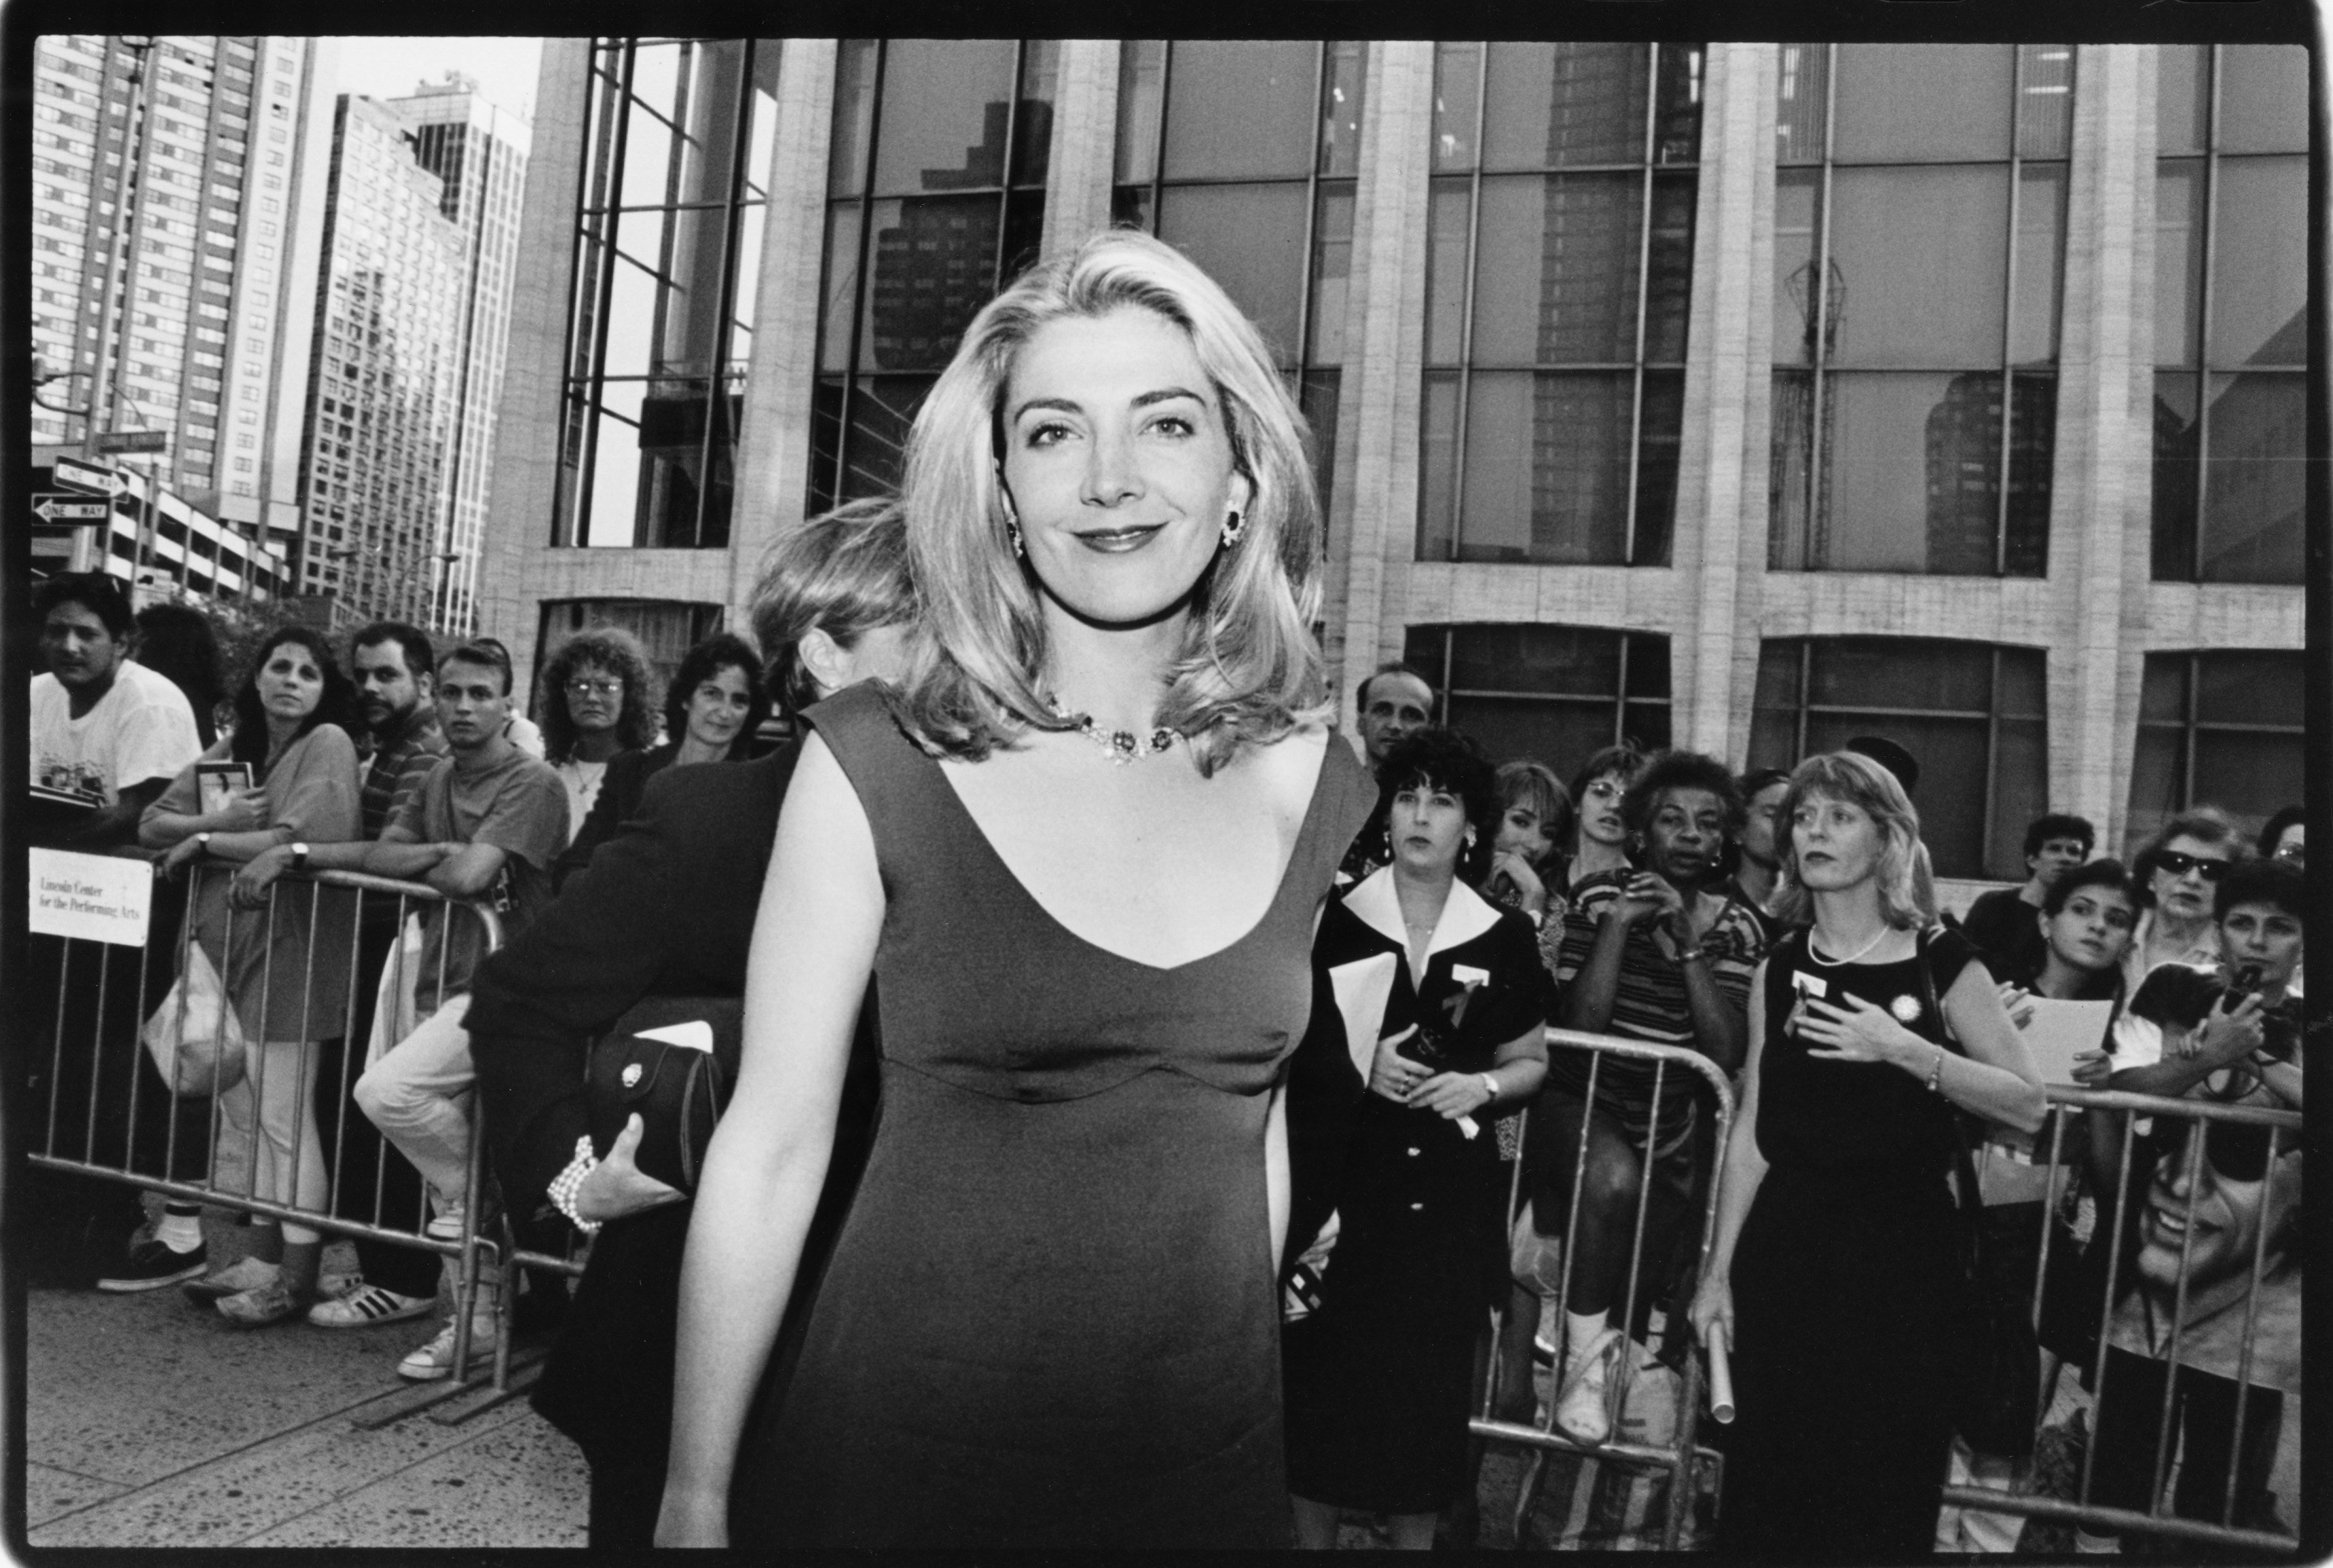 Natasha Richardson posing for a photo on the red carpet at the premiere of the film "Dogma" in October 1999 in New York City, New York. / Source: Getty Images